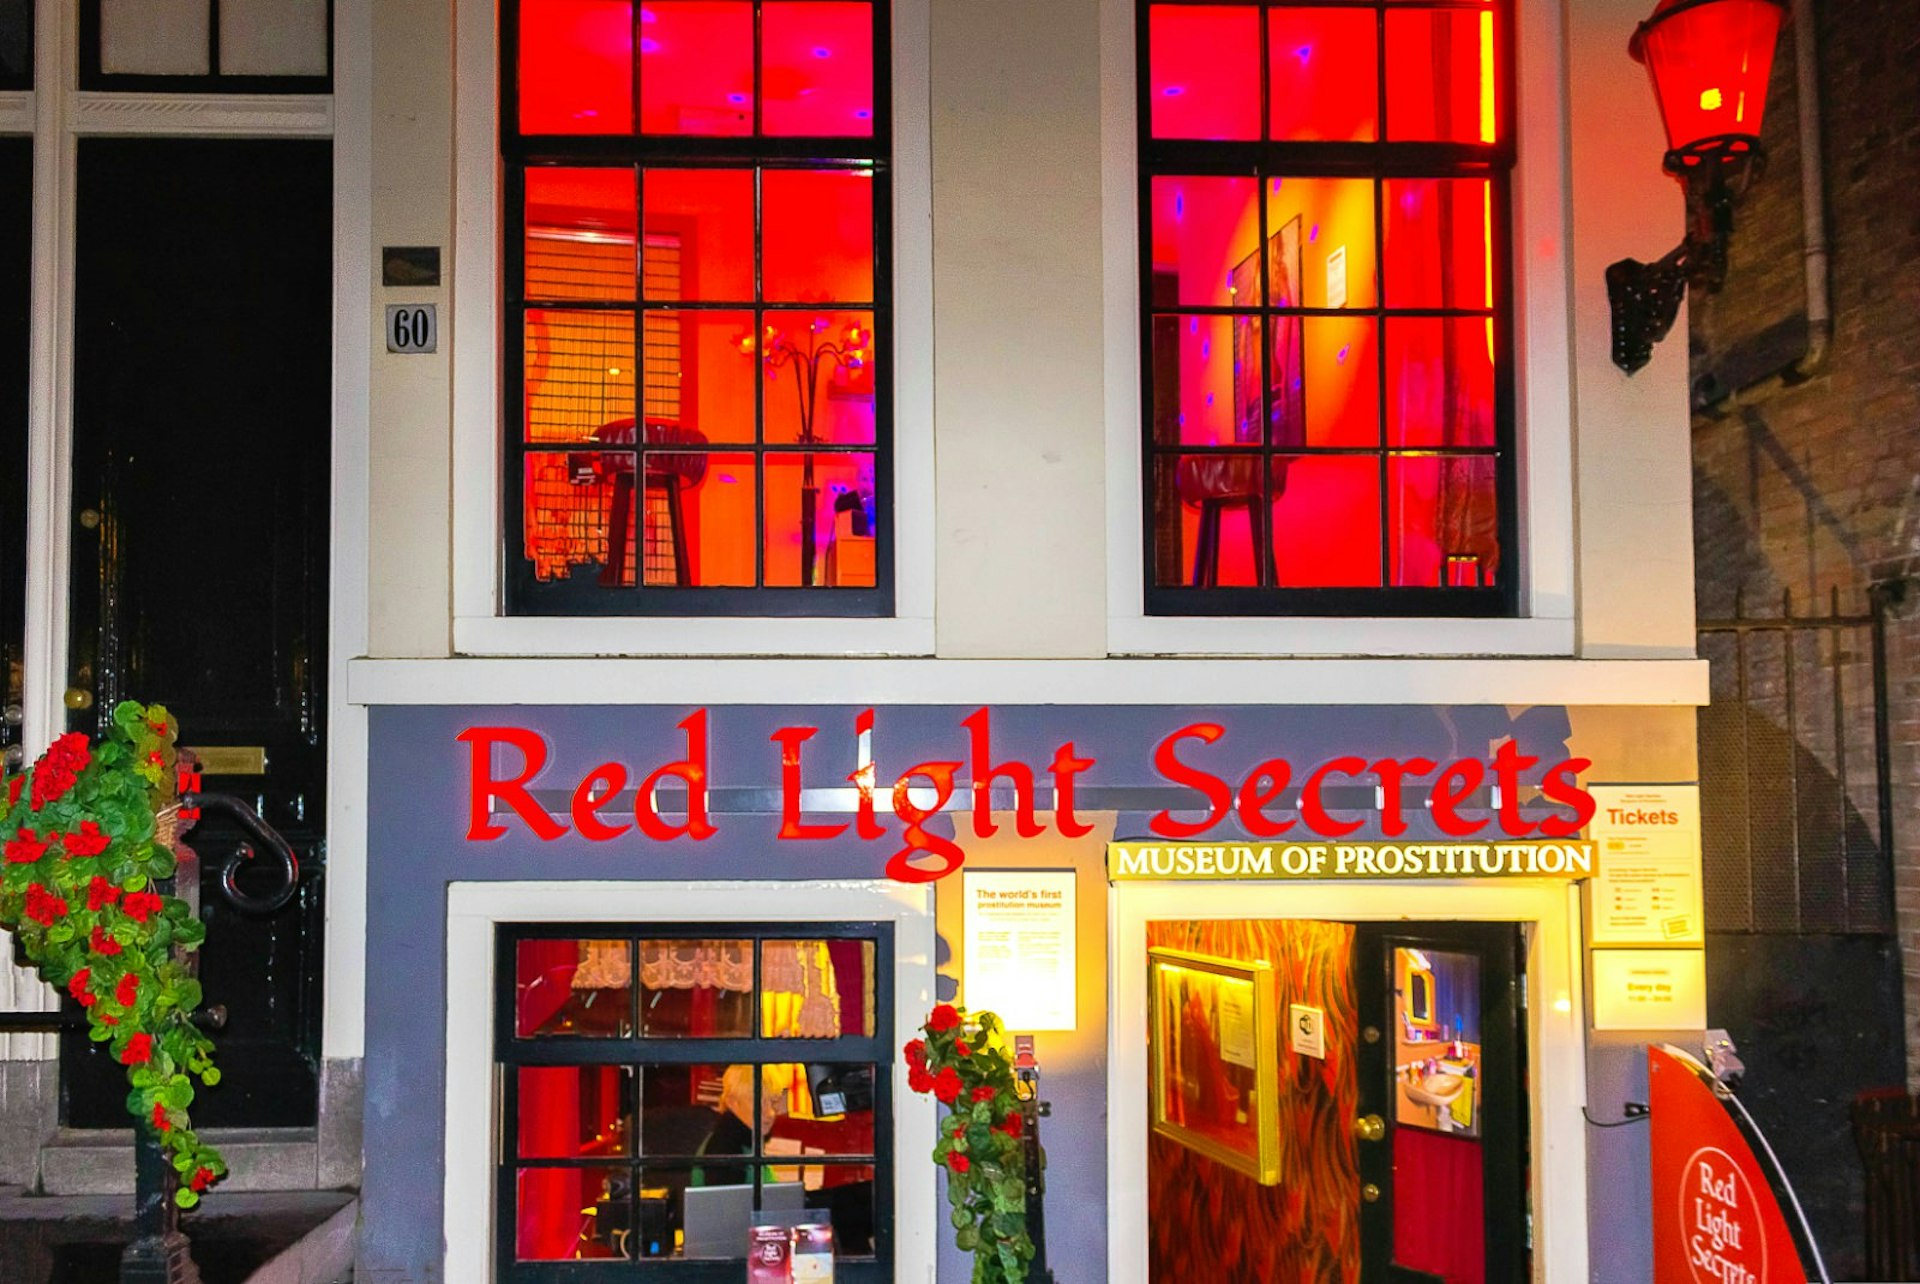 An exterior shot of the Red Light Secrets Museum of Prostitution in the centre of Amsterdam, The Netherlands